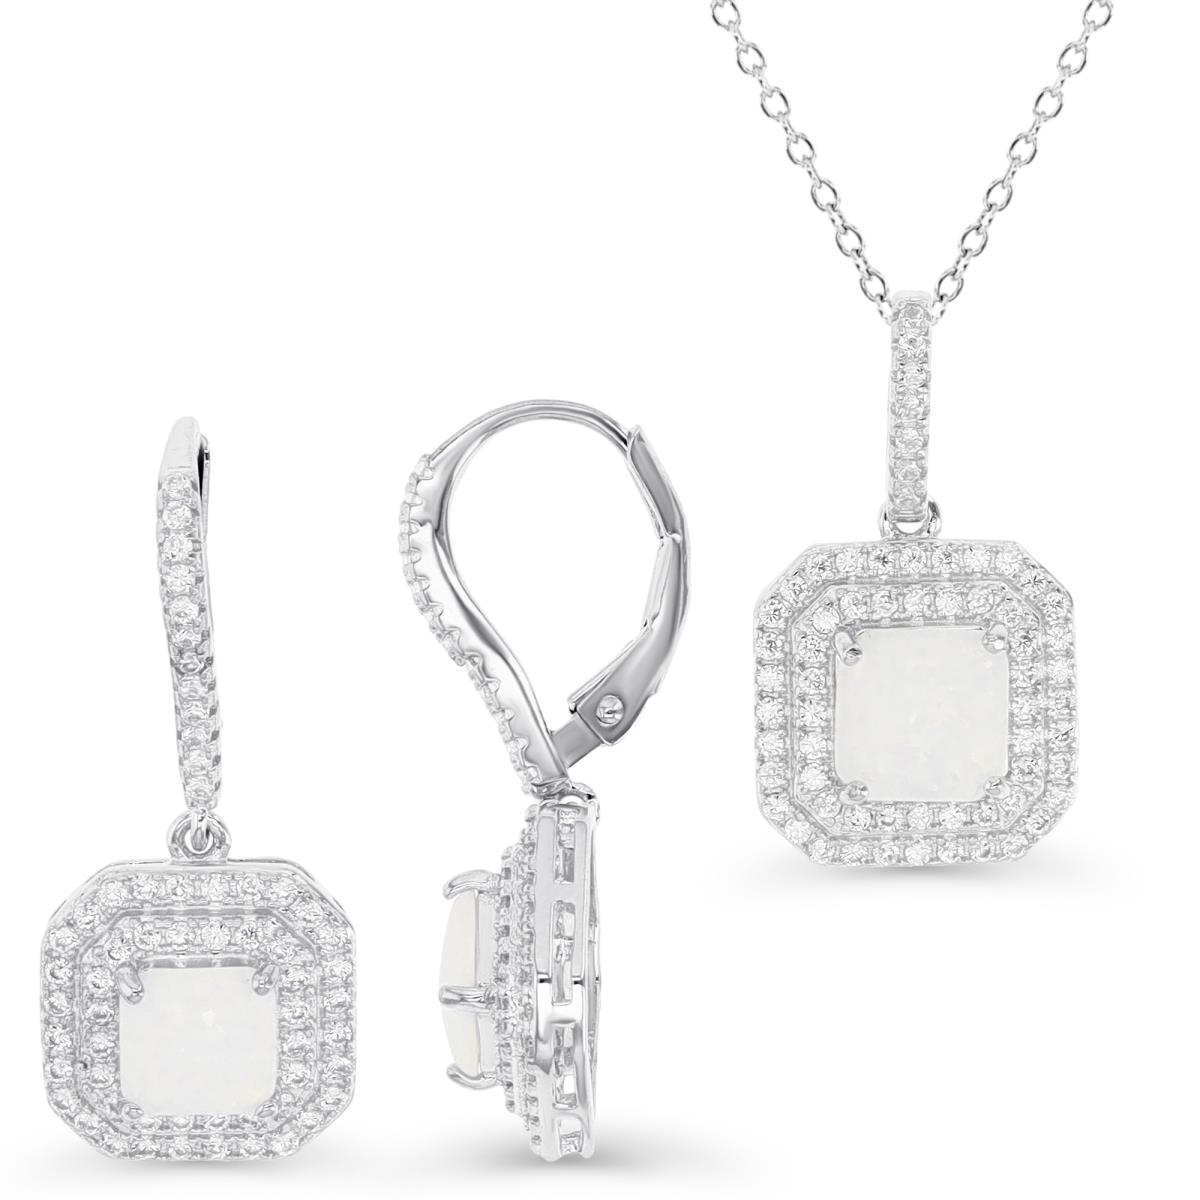 Sterling Silver Rhodium & CU Ct. Cr. White Opal and Cr. White Sapphire Halo Earrings and 18" Necklace Set